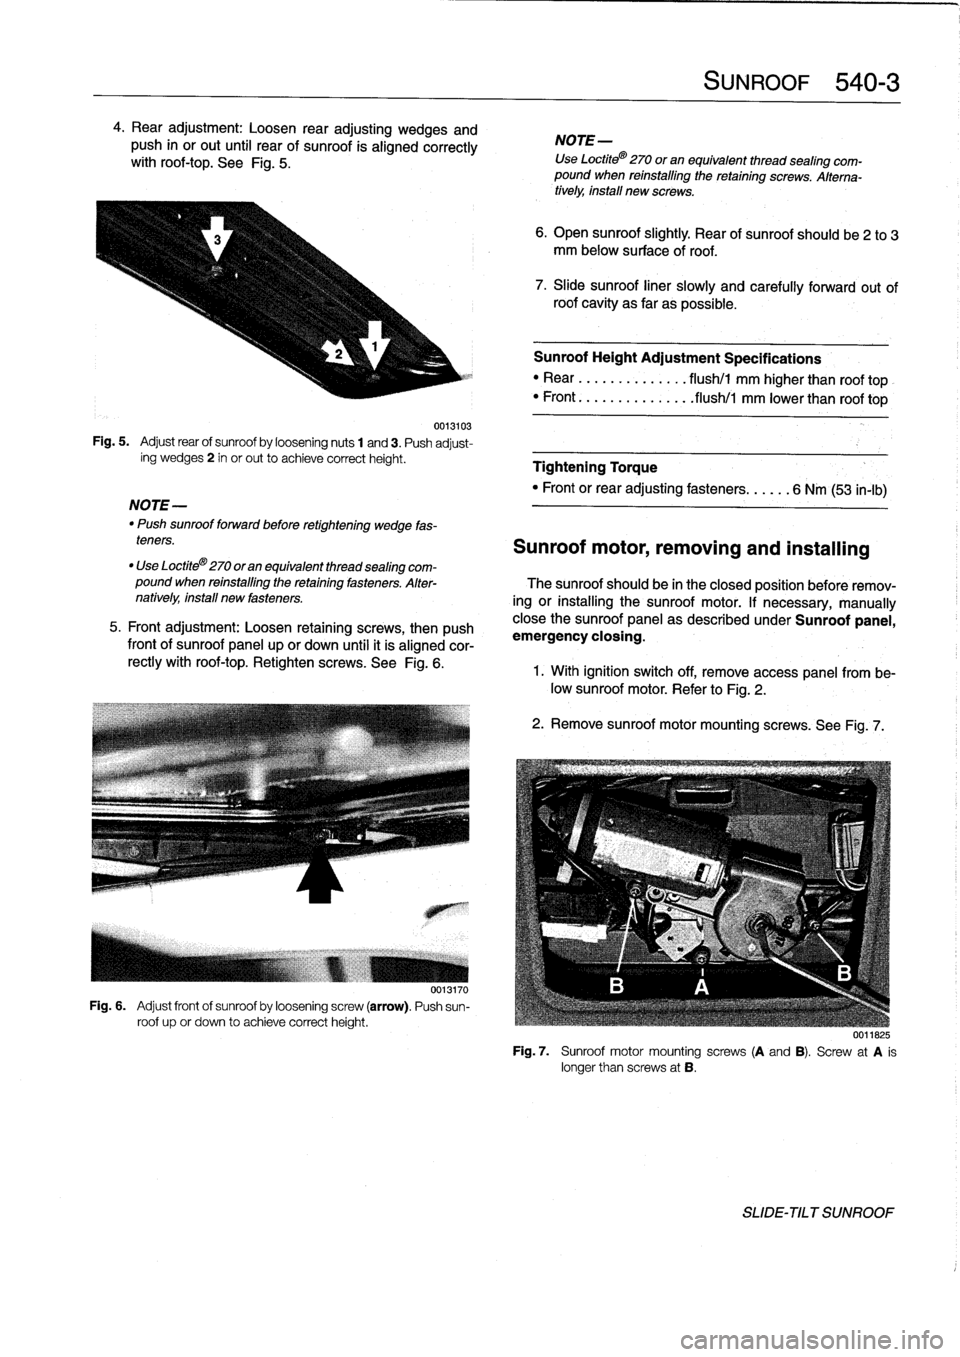 BMW 323i 1993 E36 Workshop Manual 4
.
Rear
adjustment
:
Loosen
rear
adjusting
wedges
and
push
in
or
out
until
rear
of
sunroof
is
aligned
correctly
withroof-top
.
See
Fig
.
5
.

0013103
Fig
.
5
.

	

Adjust
rear
of
sunroof
by
loosening